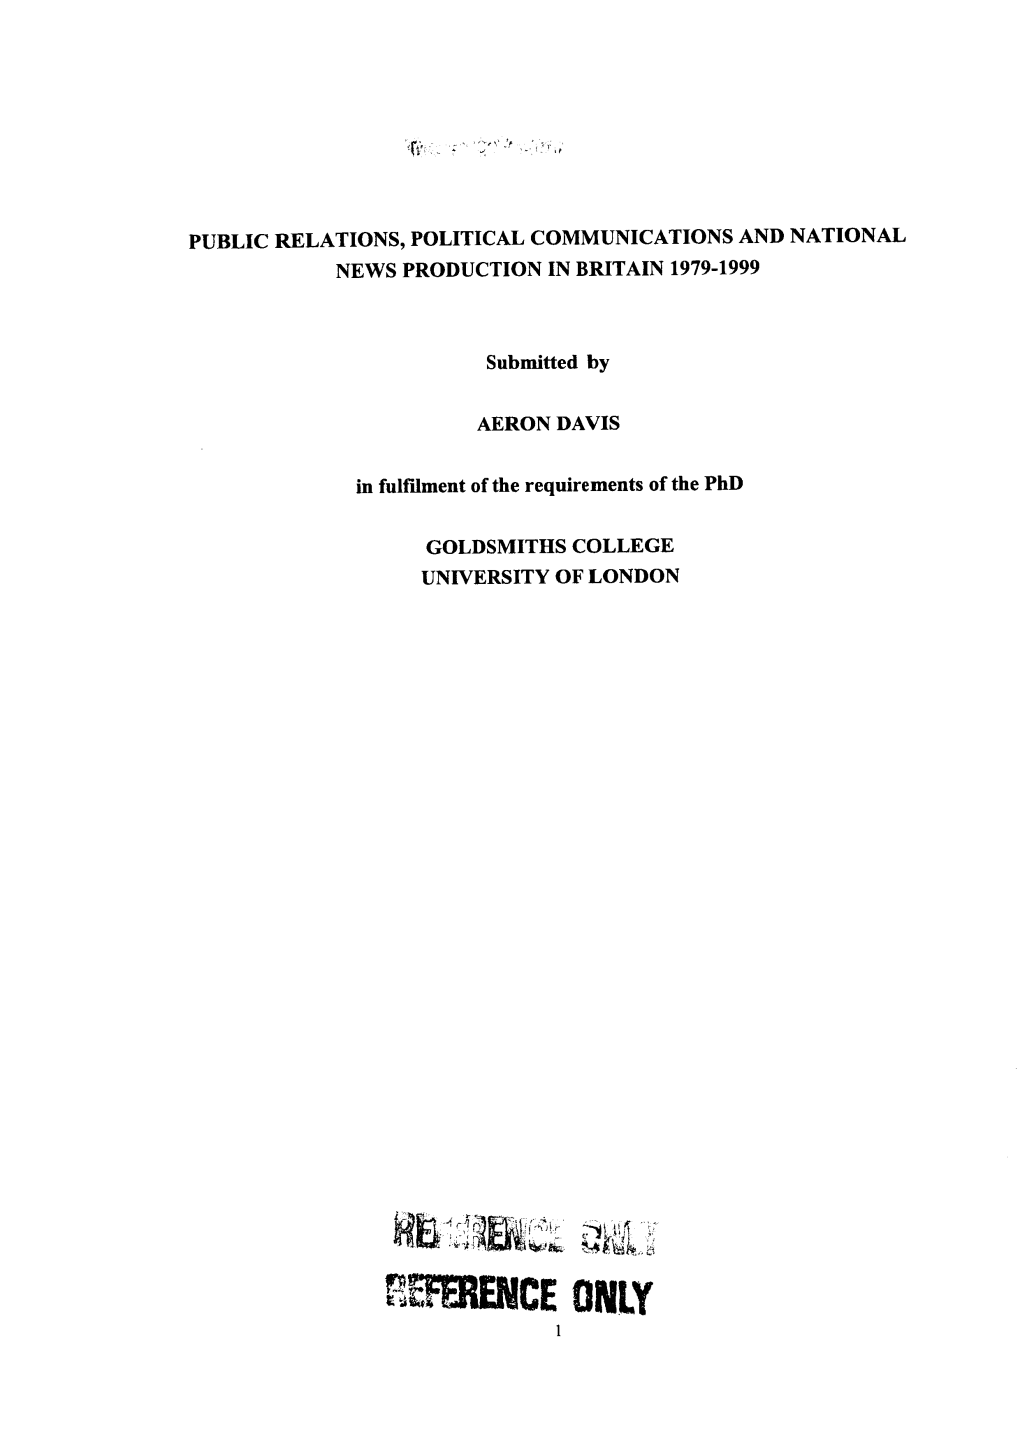 Public Relations, Political Communications and National News Production in Britain 1979-1999